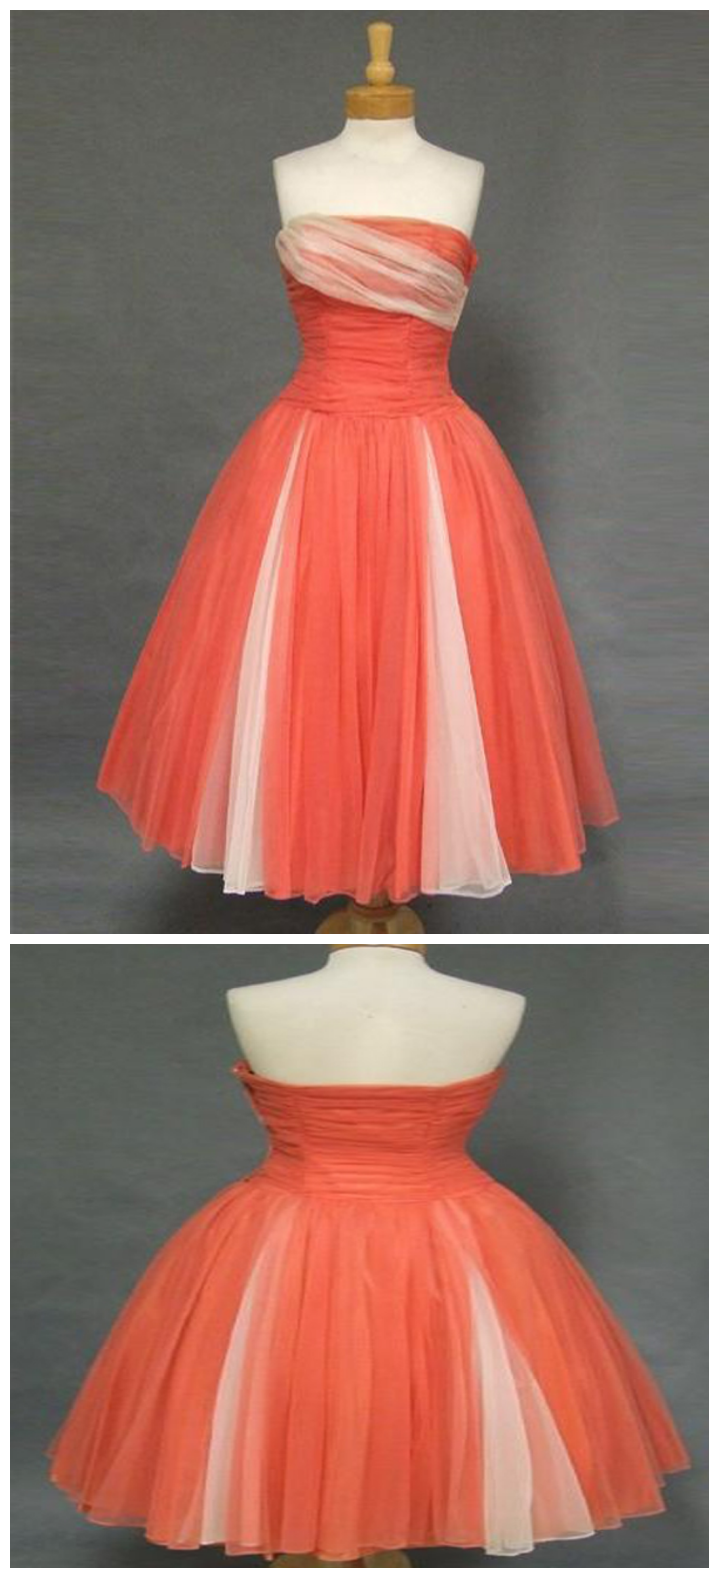 Strapless Homecoming Dresses, Length Homecoming Dresses,orange Homecoming Dress,tulle Homecoming Dresses